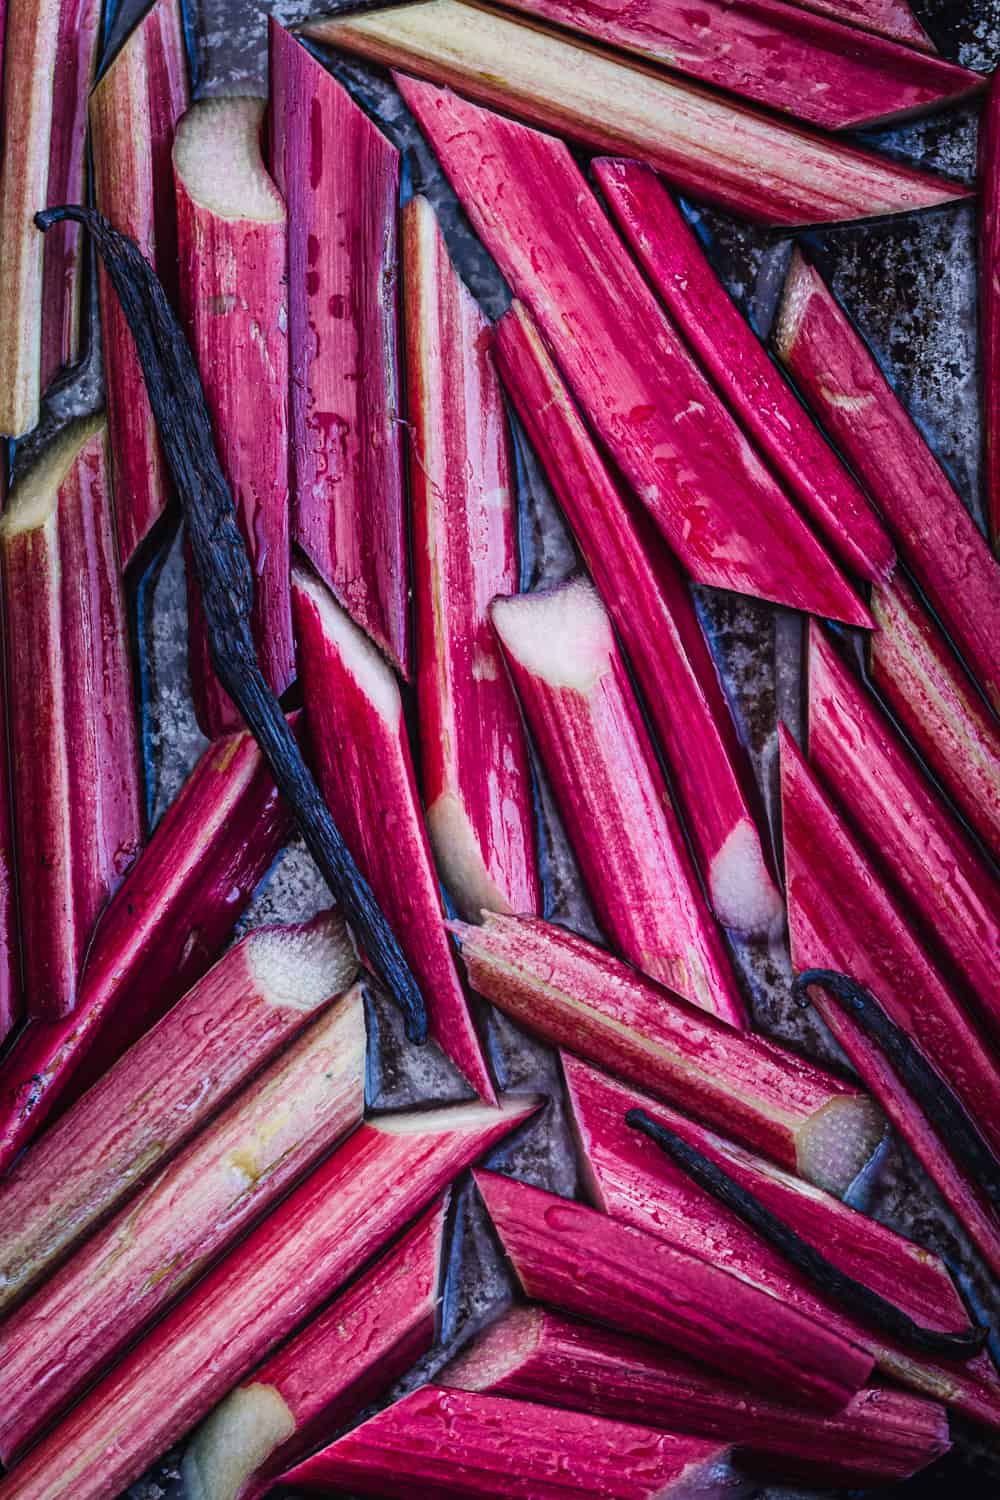 Raw rhubarb stalks sliced on a tray with vanilla and ready to be cooked in the oven.